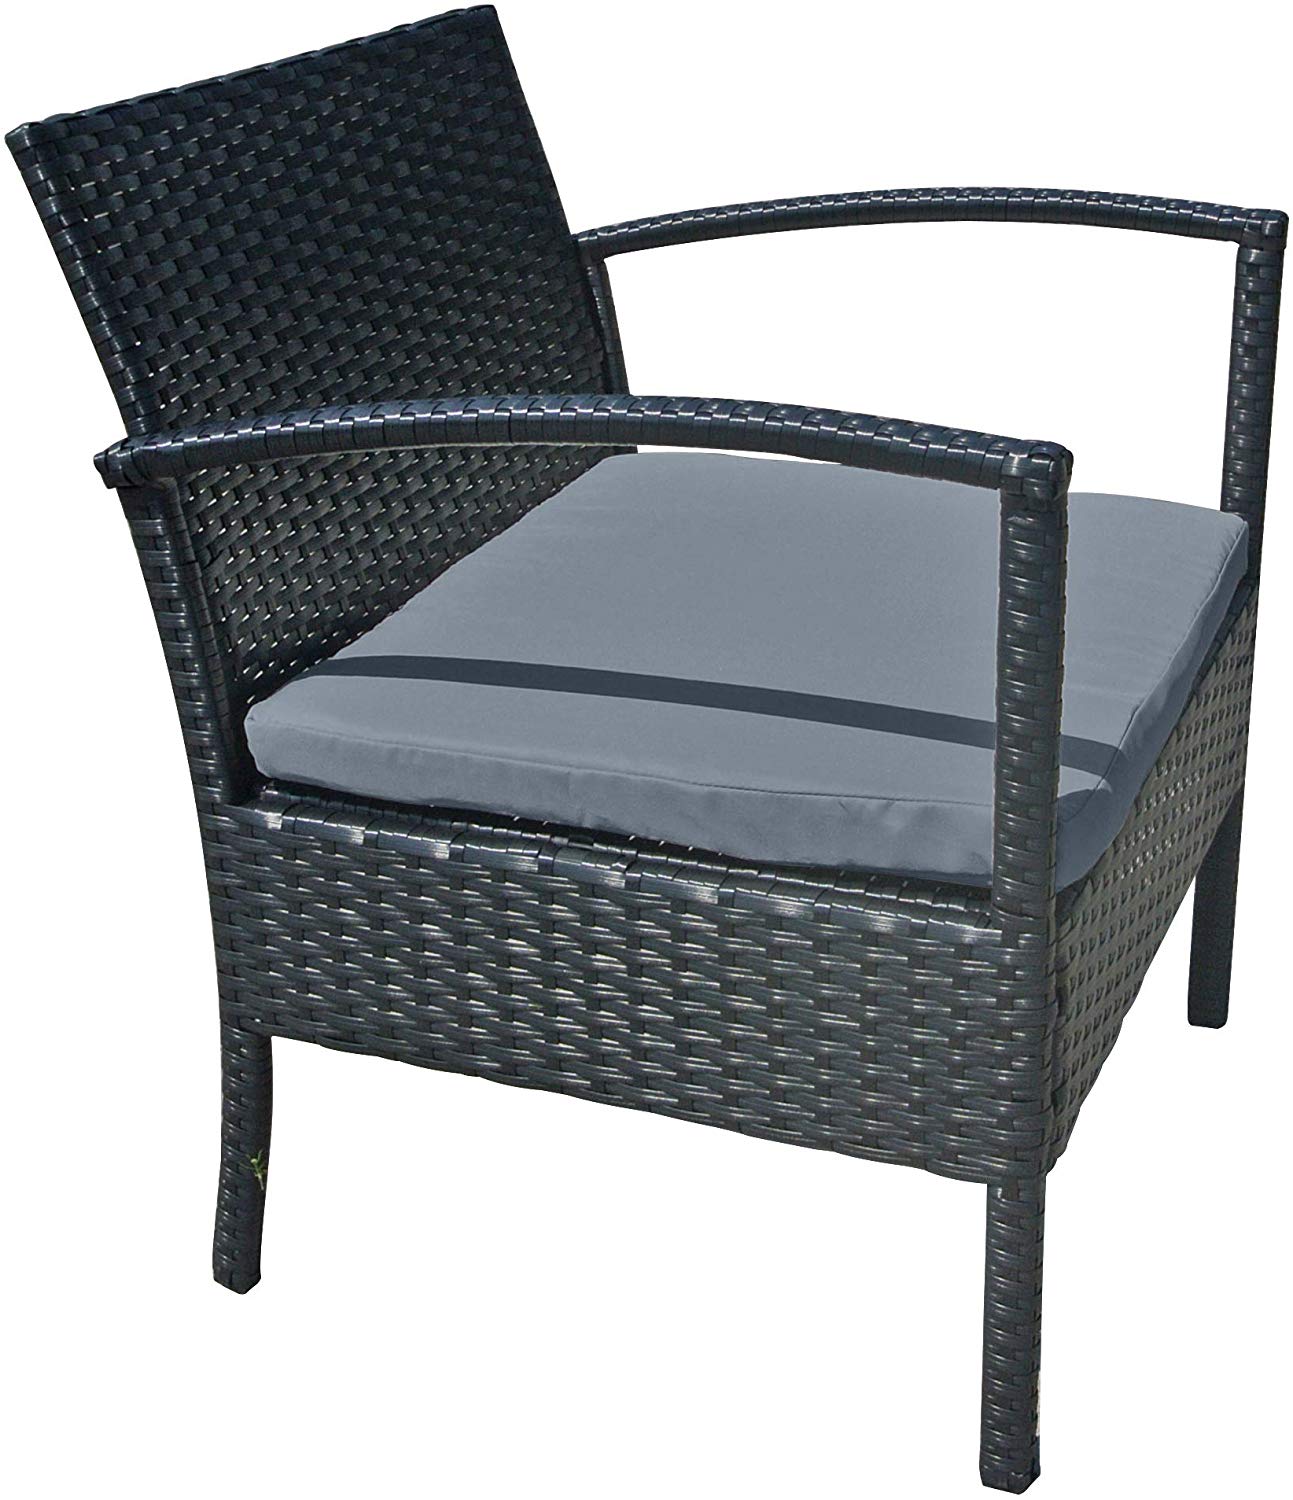 Stellahome 4Pcs Outdoor Wicker Table Chairs Bench in Black and Grey&Beige